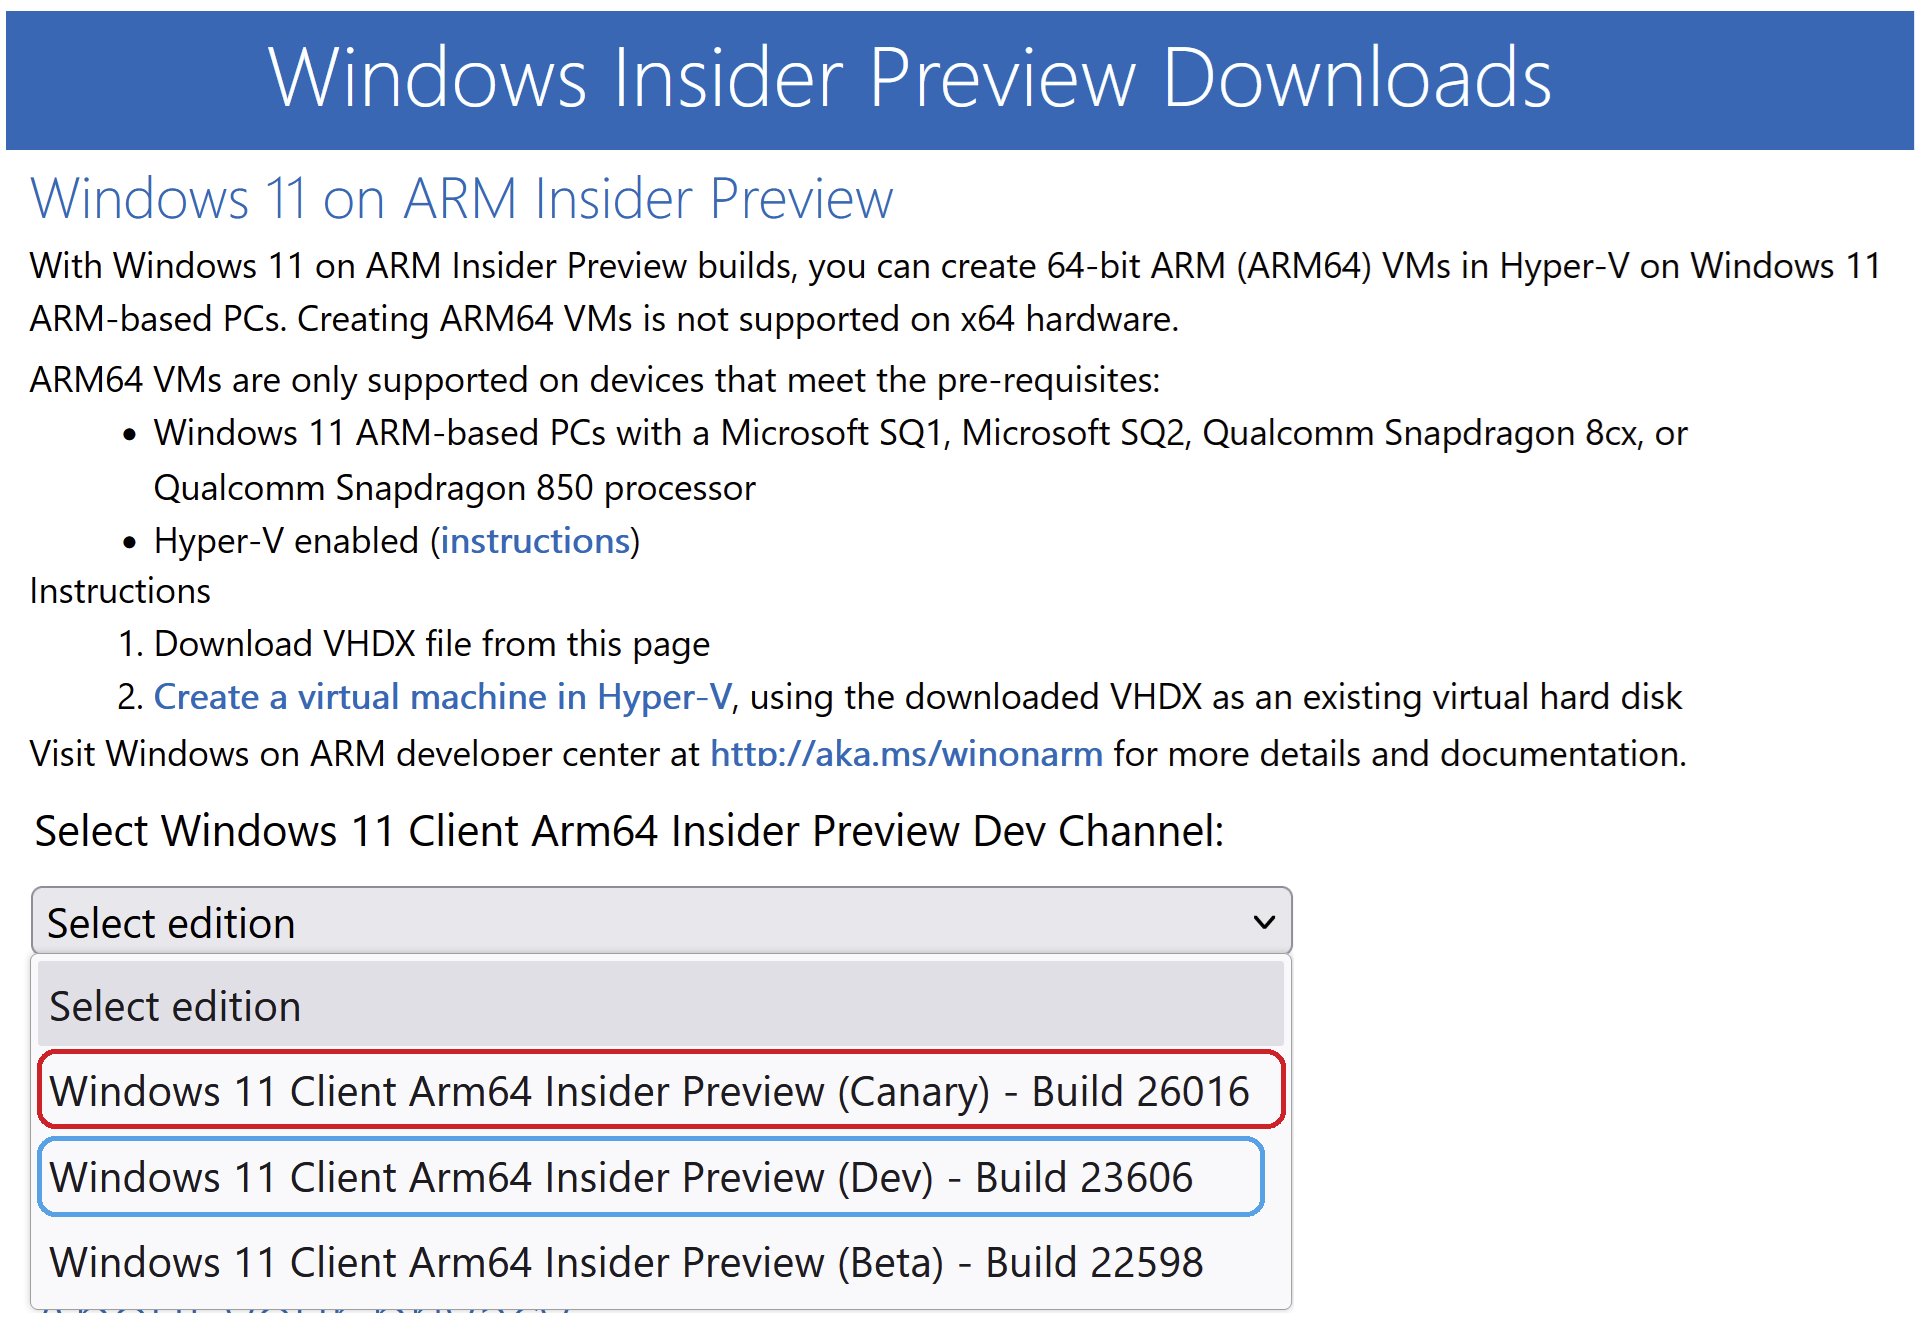 Cannot download Windows 11 ARM Insider Preview ISO - Microsoft Community Hub